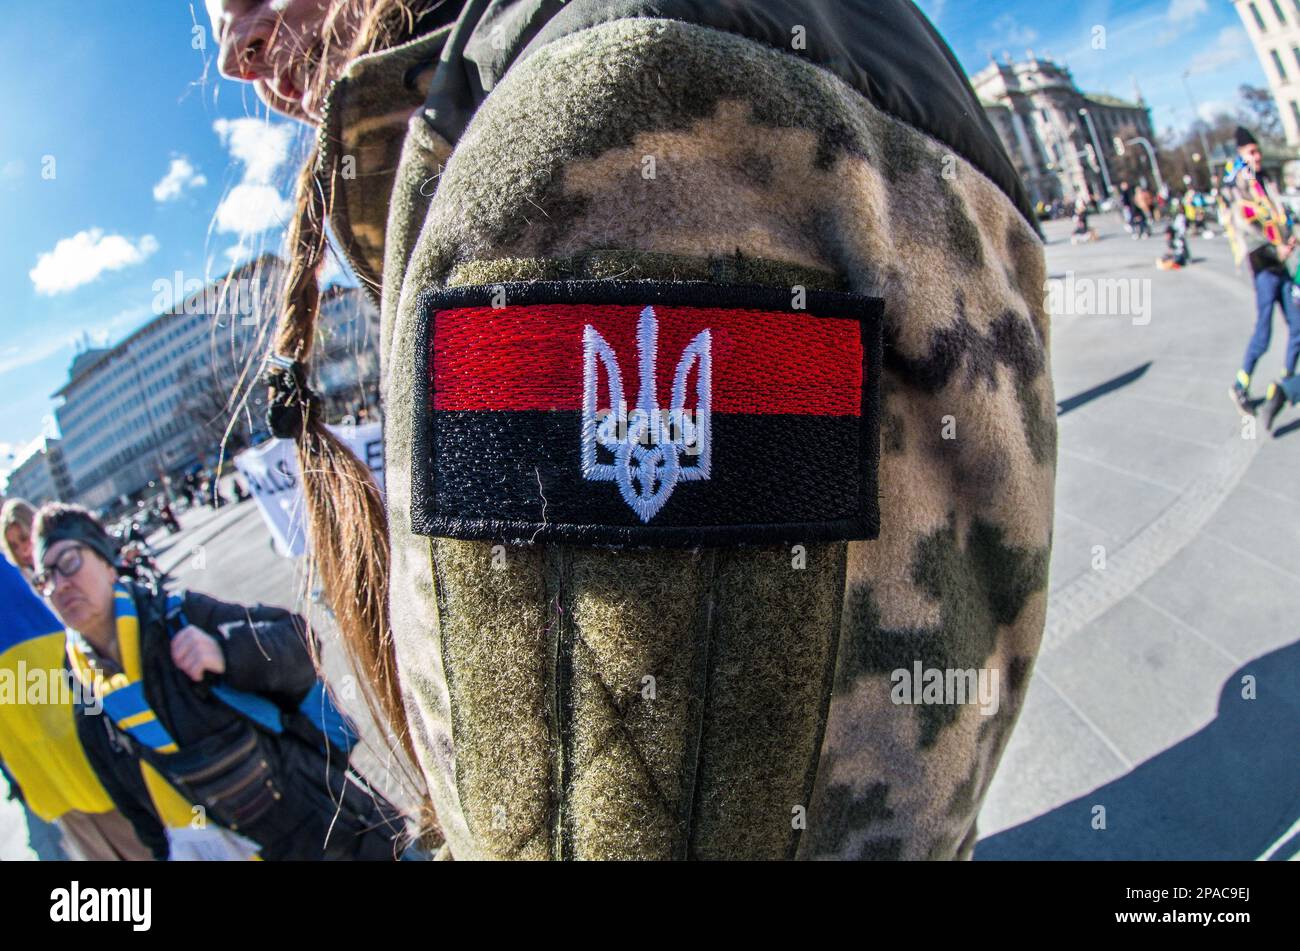 March 11, 2023, Munich, Bavaria, Germany: A red, white, and black patch which is often associated with the Organization of Ukrainian nationalists and the Stepan Bander followers. The red and the black, however, predates the era of Bandera and typically denotes the Ukrainian struggle for independence from Russia. As Russia pounds cities across Ukraine with waves of hypersonic missiles, Ukrainians and Germans in Munich, Germany made demands for peace and the immediate withdrawal of Russia from Ukrainian territory. The participants also thanked Germany and the alliance for the support for Ukraini Stock Photo